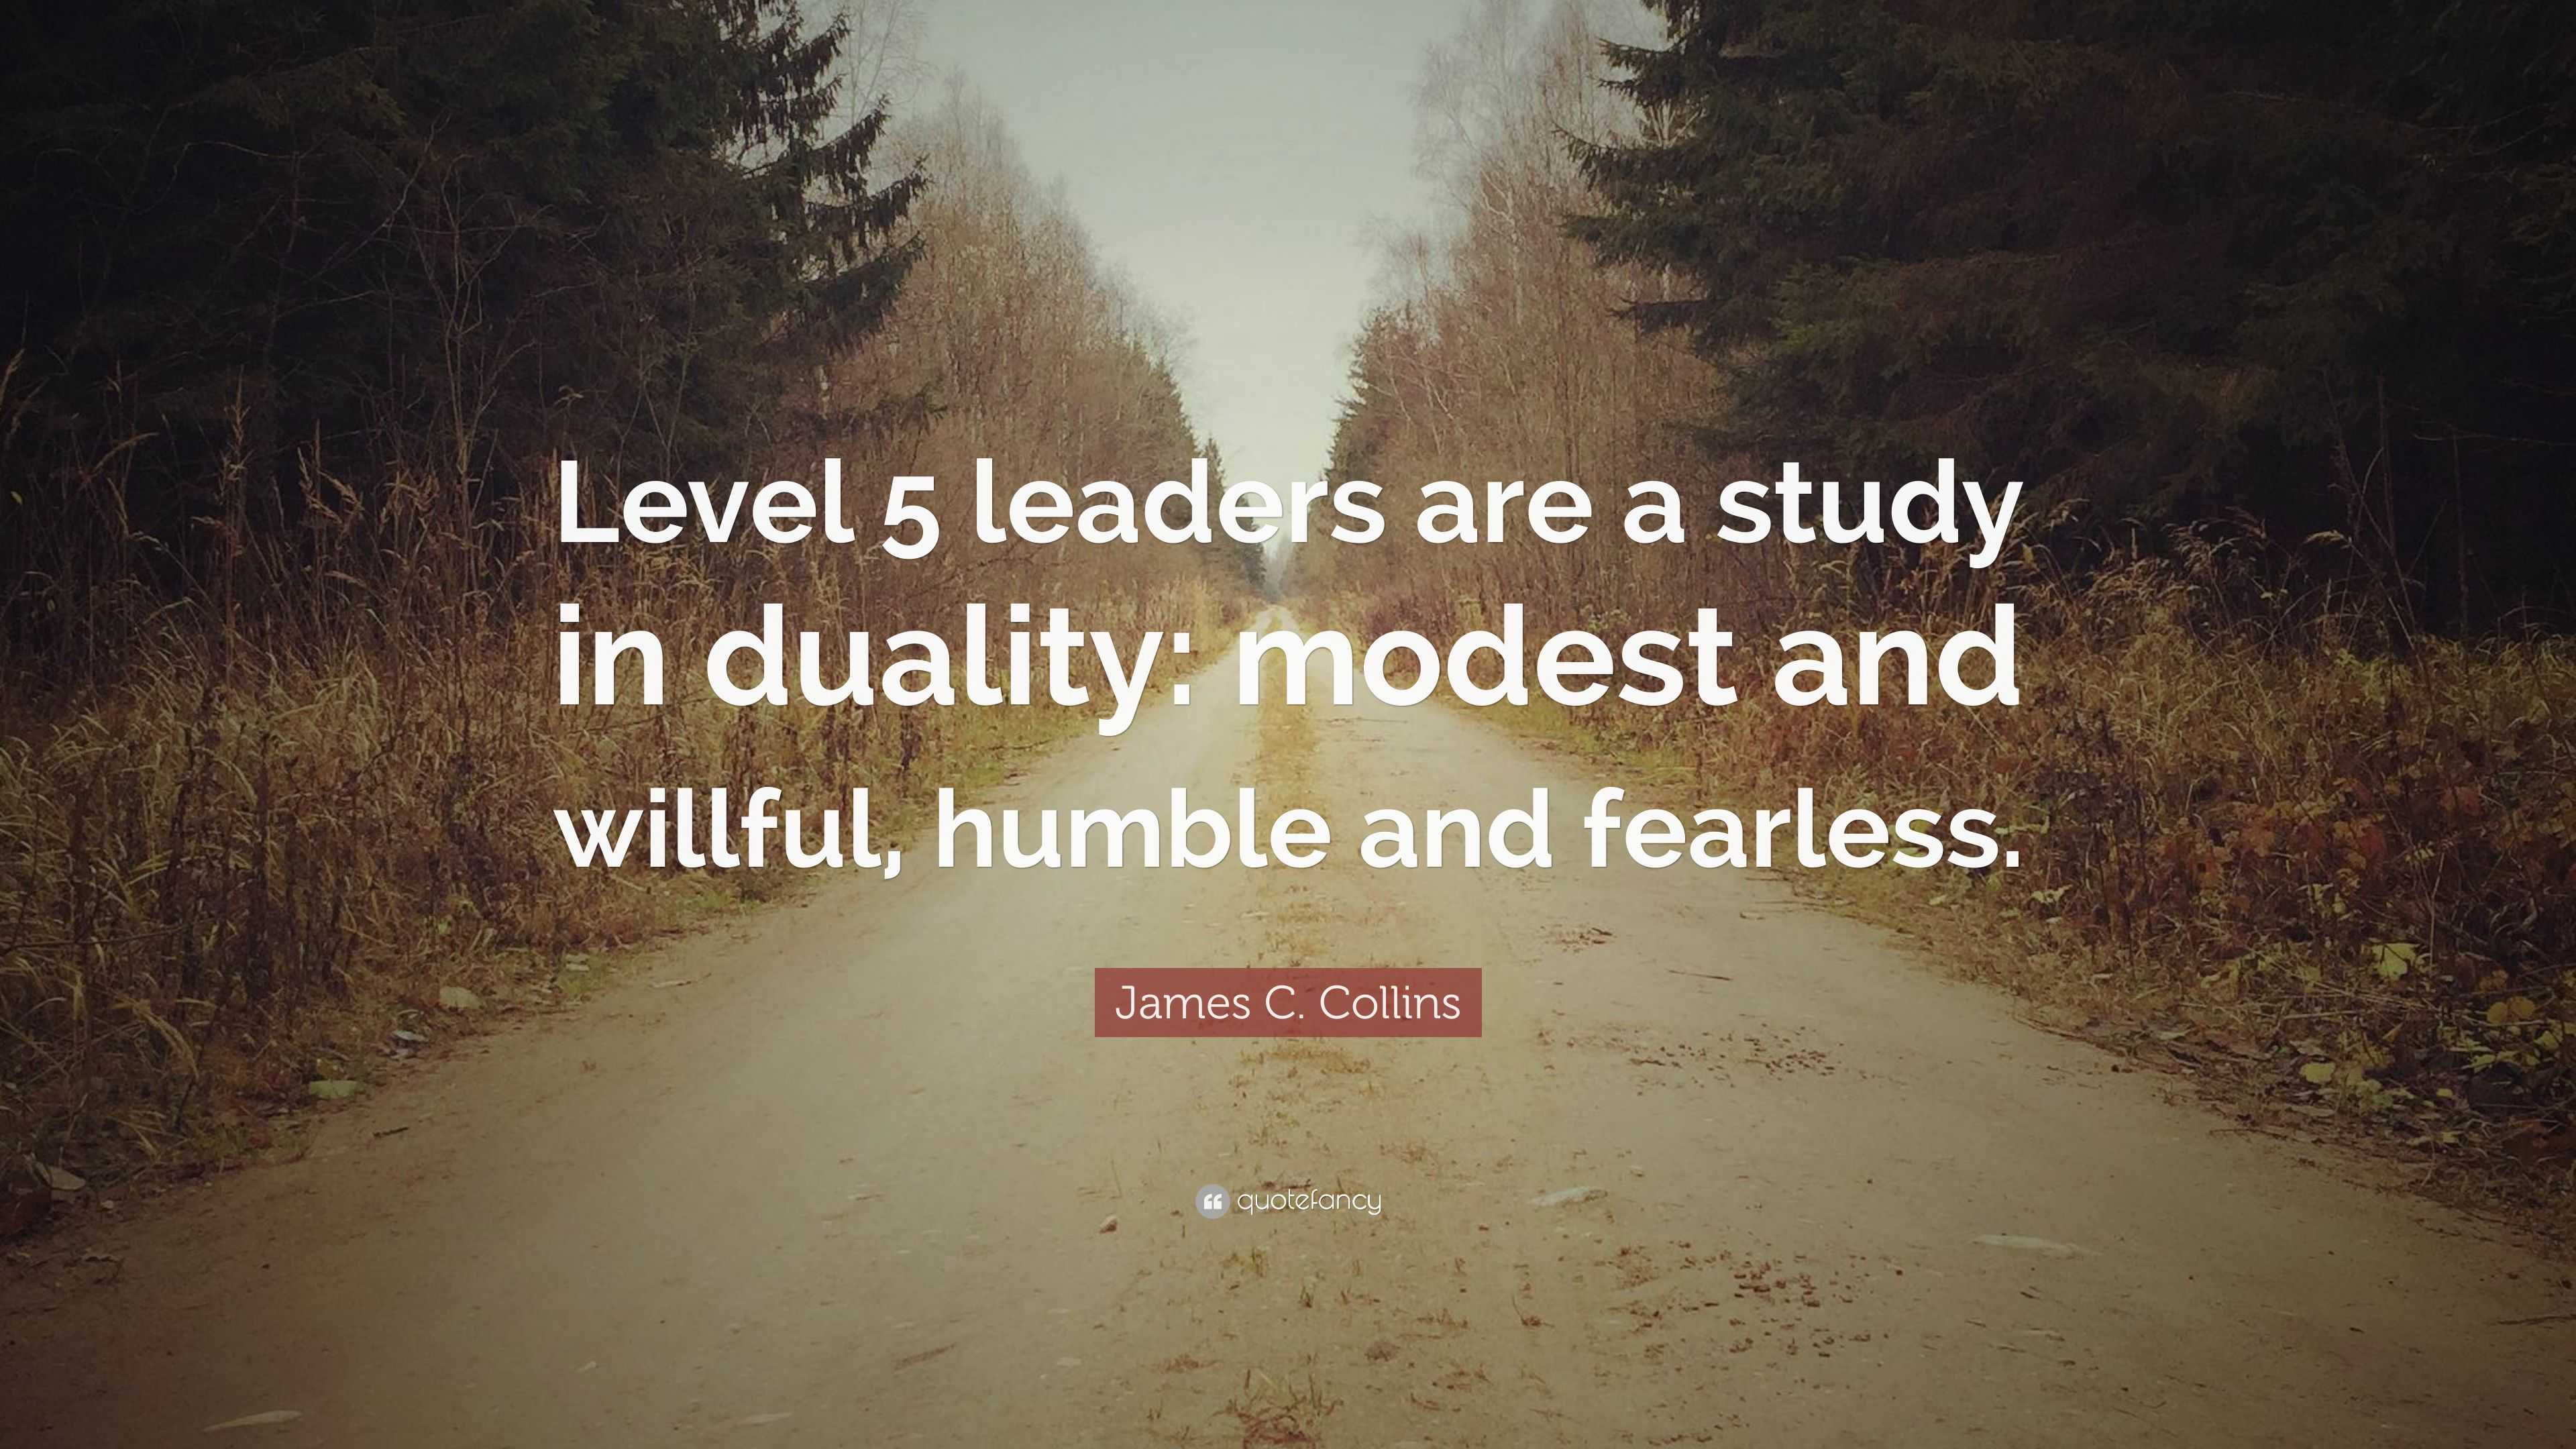 James C. Collins Quote: “Level 5 leaders are a study in duality: modest ...